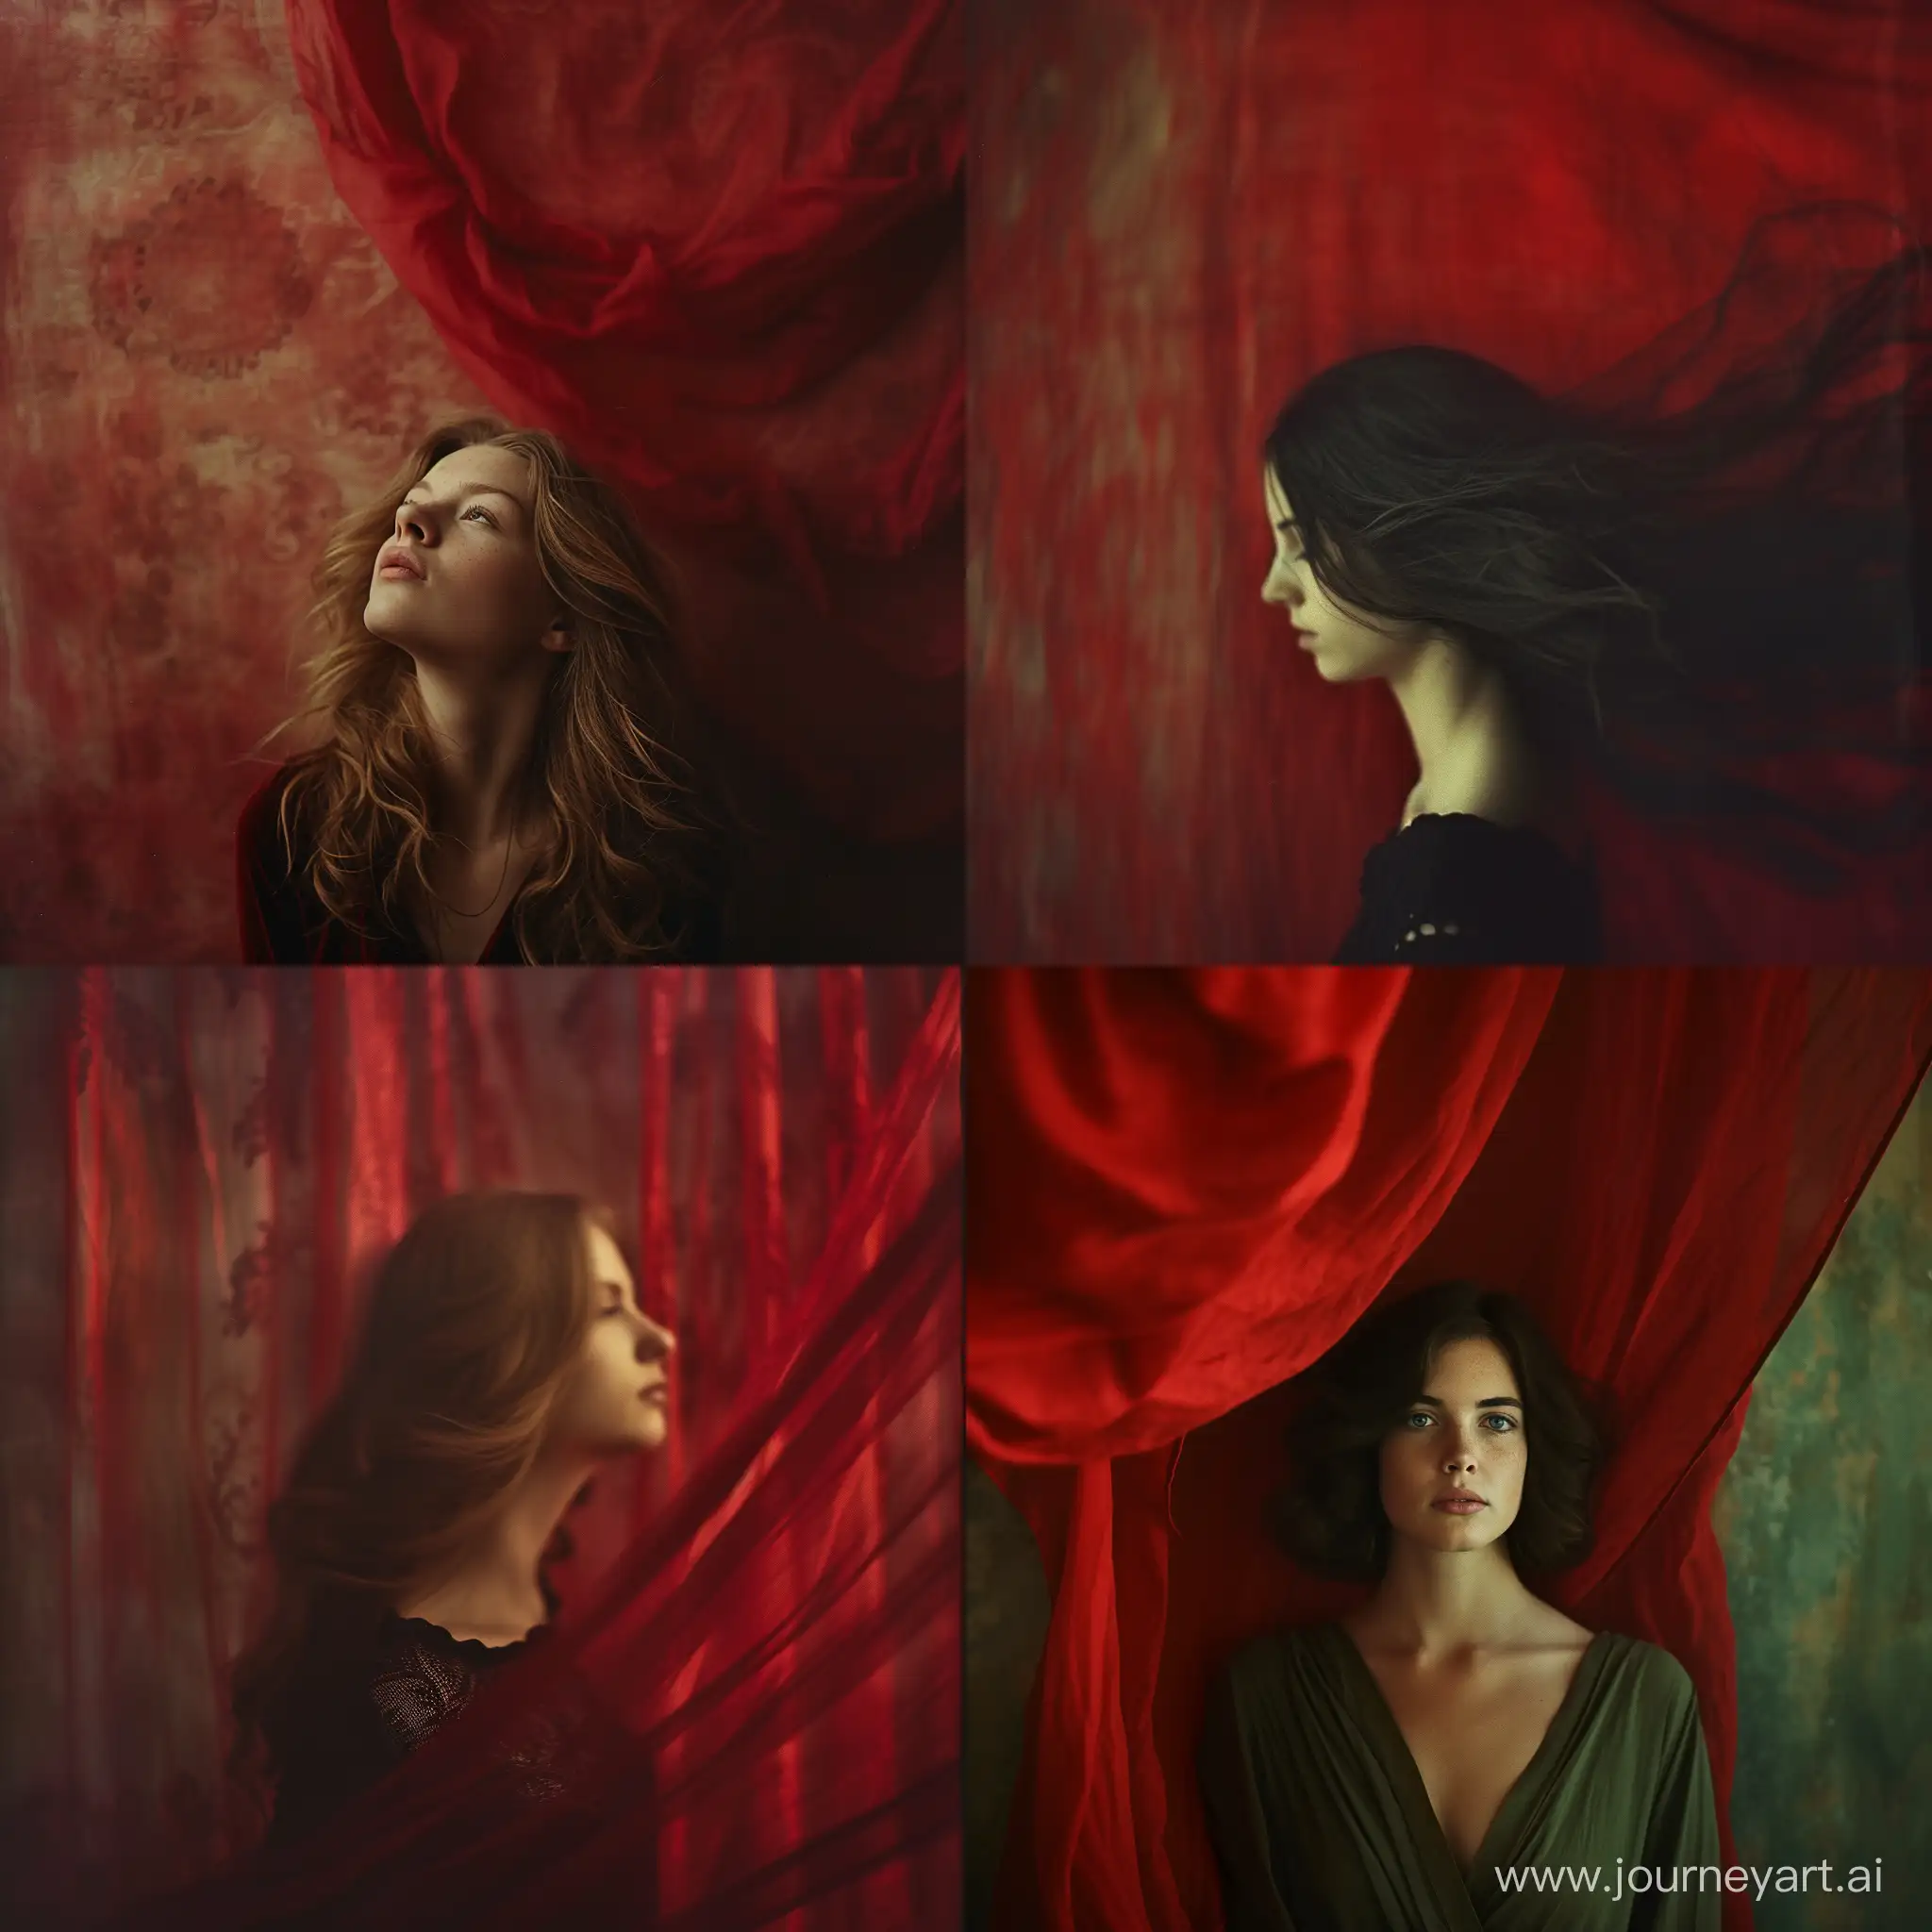 photographic portrait of a 40 years old, German woman, vivid eye contact, wavy hair, standing against an earth-colored wall with a red drape hanging from the ceiling, summer light, shot with Kodak Portra 160::2 by Tami Bone::3